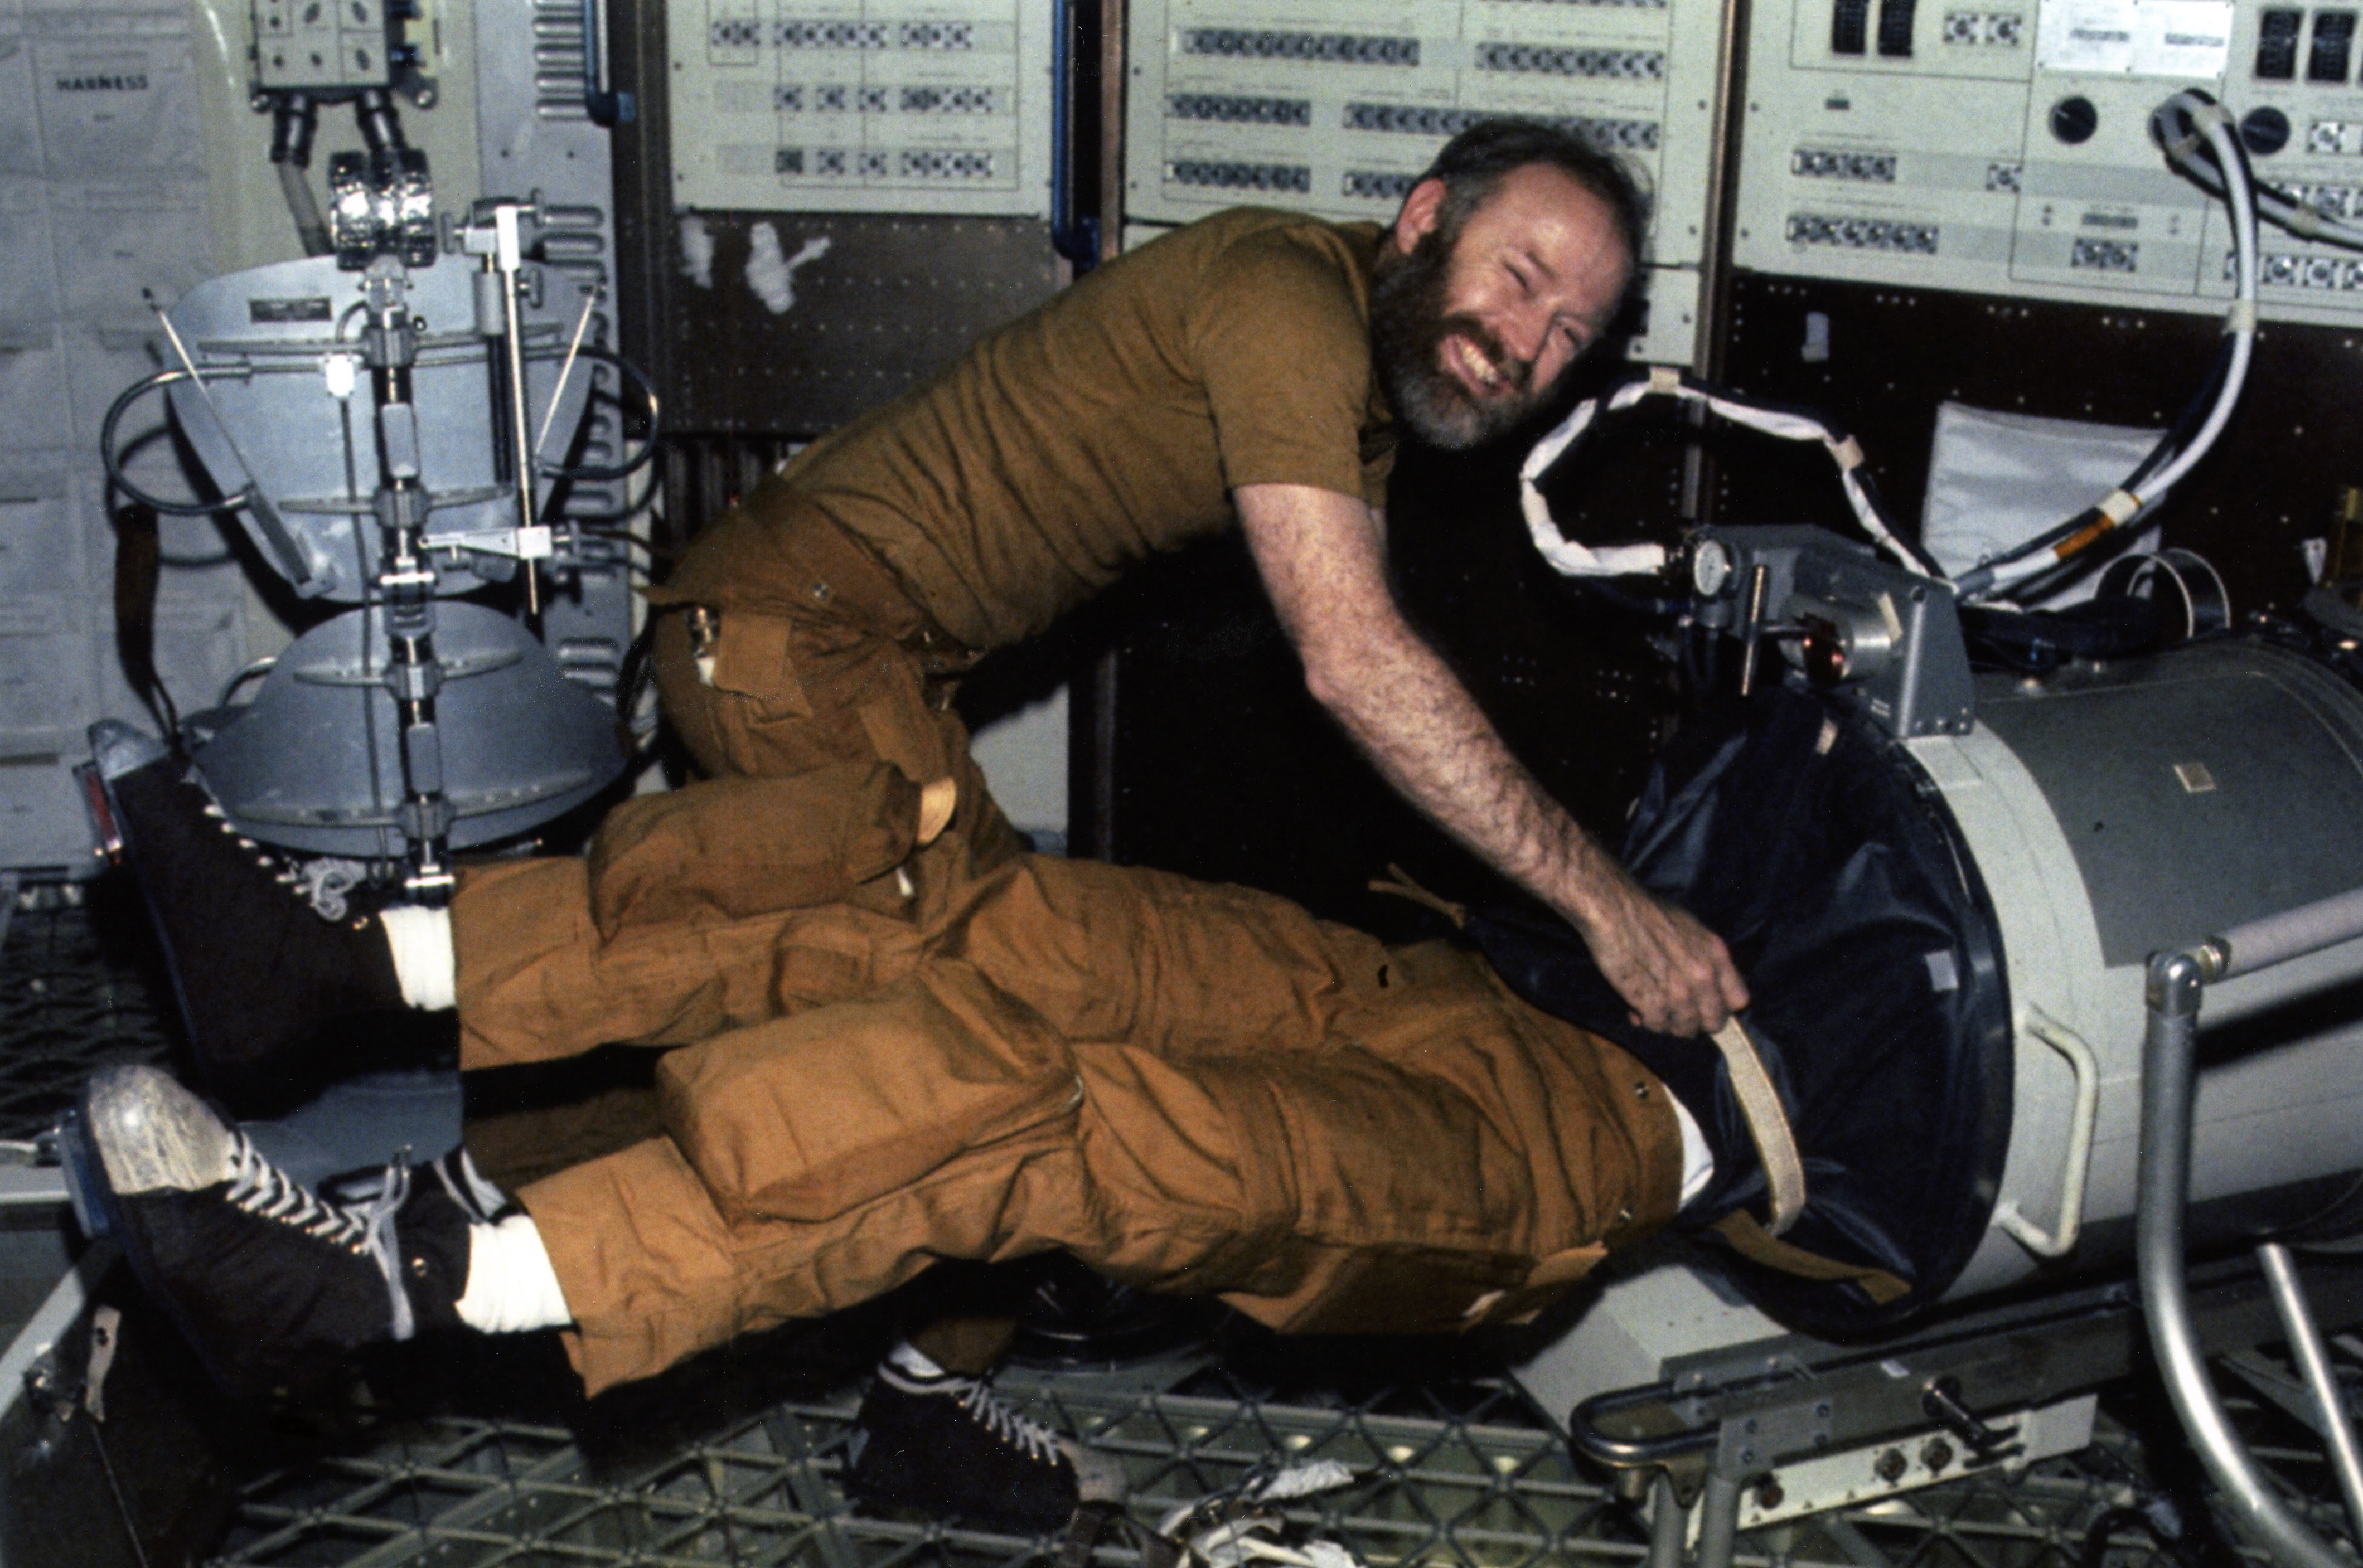 Skylab 4 astronaut Gerald P. Carr conducts an “Upper Body Negative Pressure” test on one of his fellow crew members